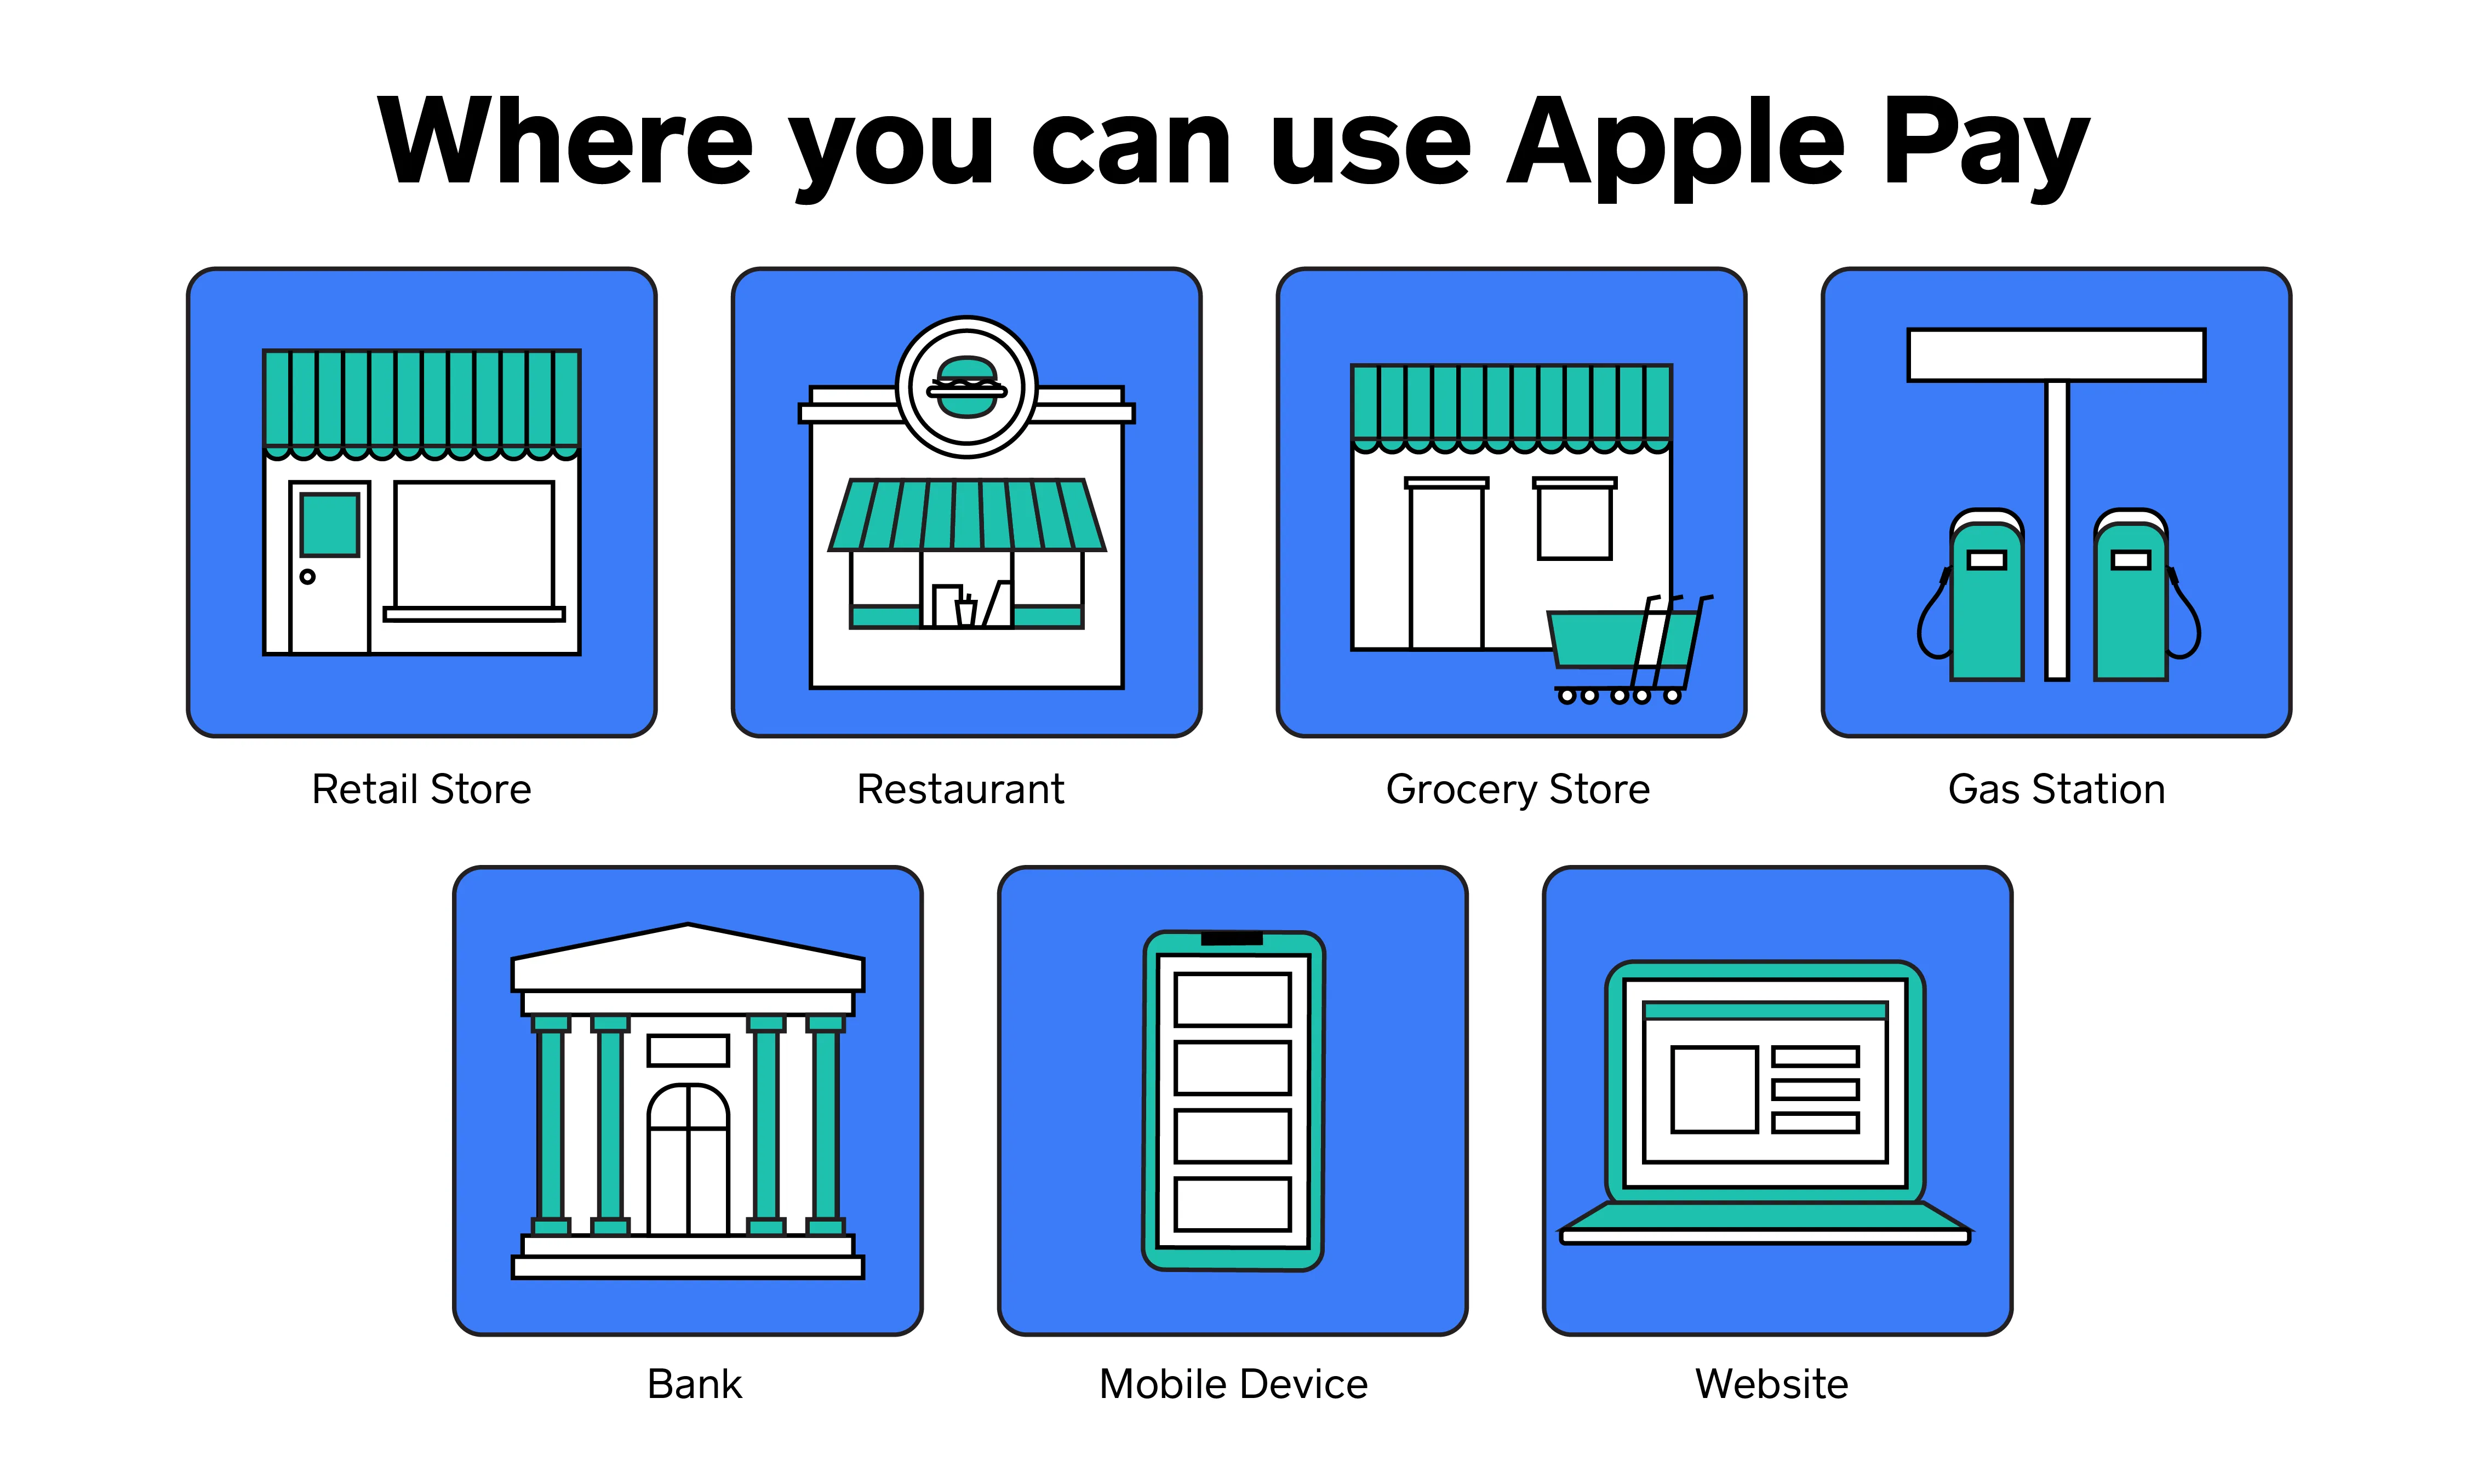 Stores that accept Apple Pay